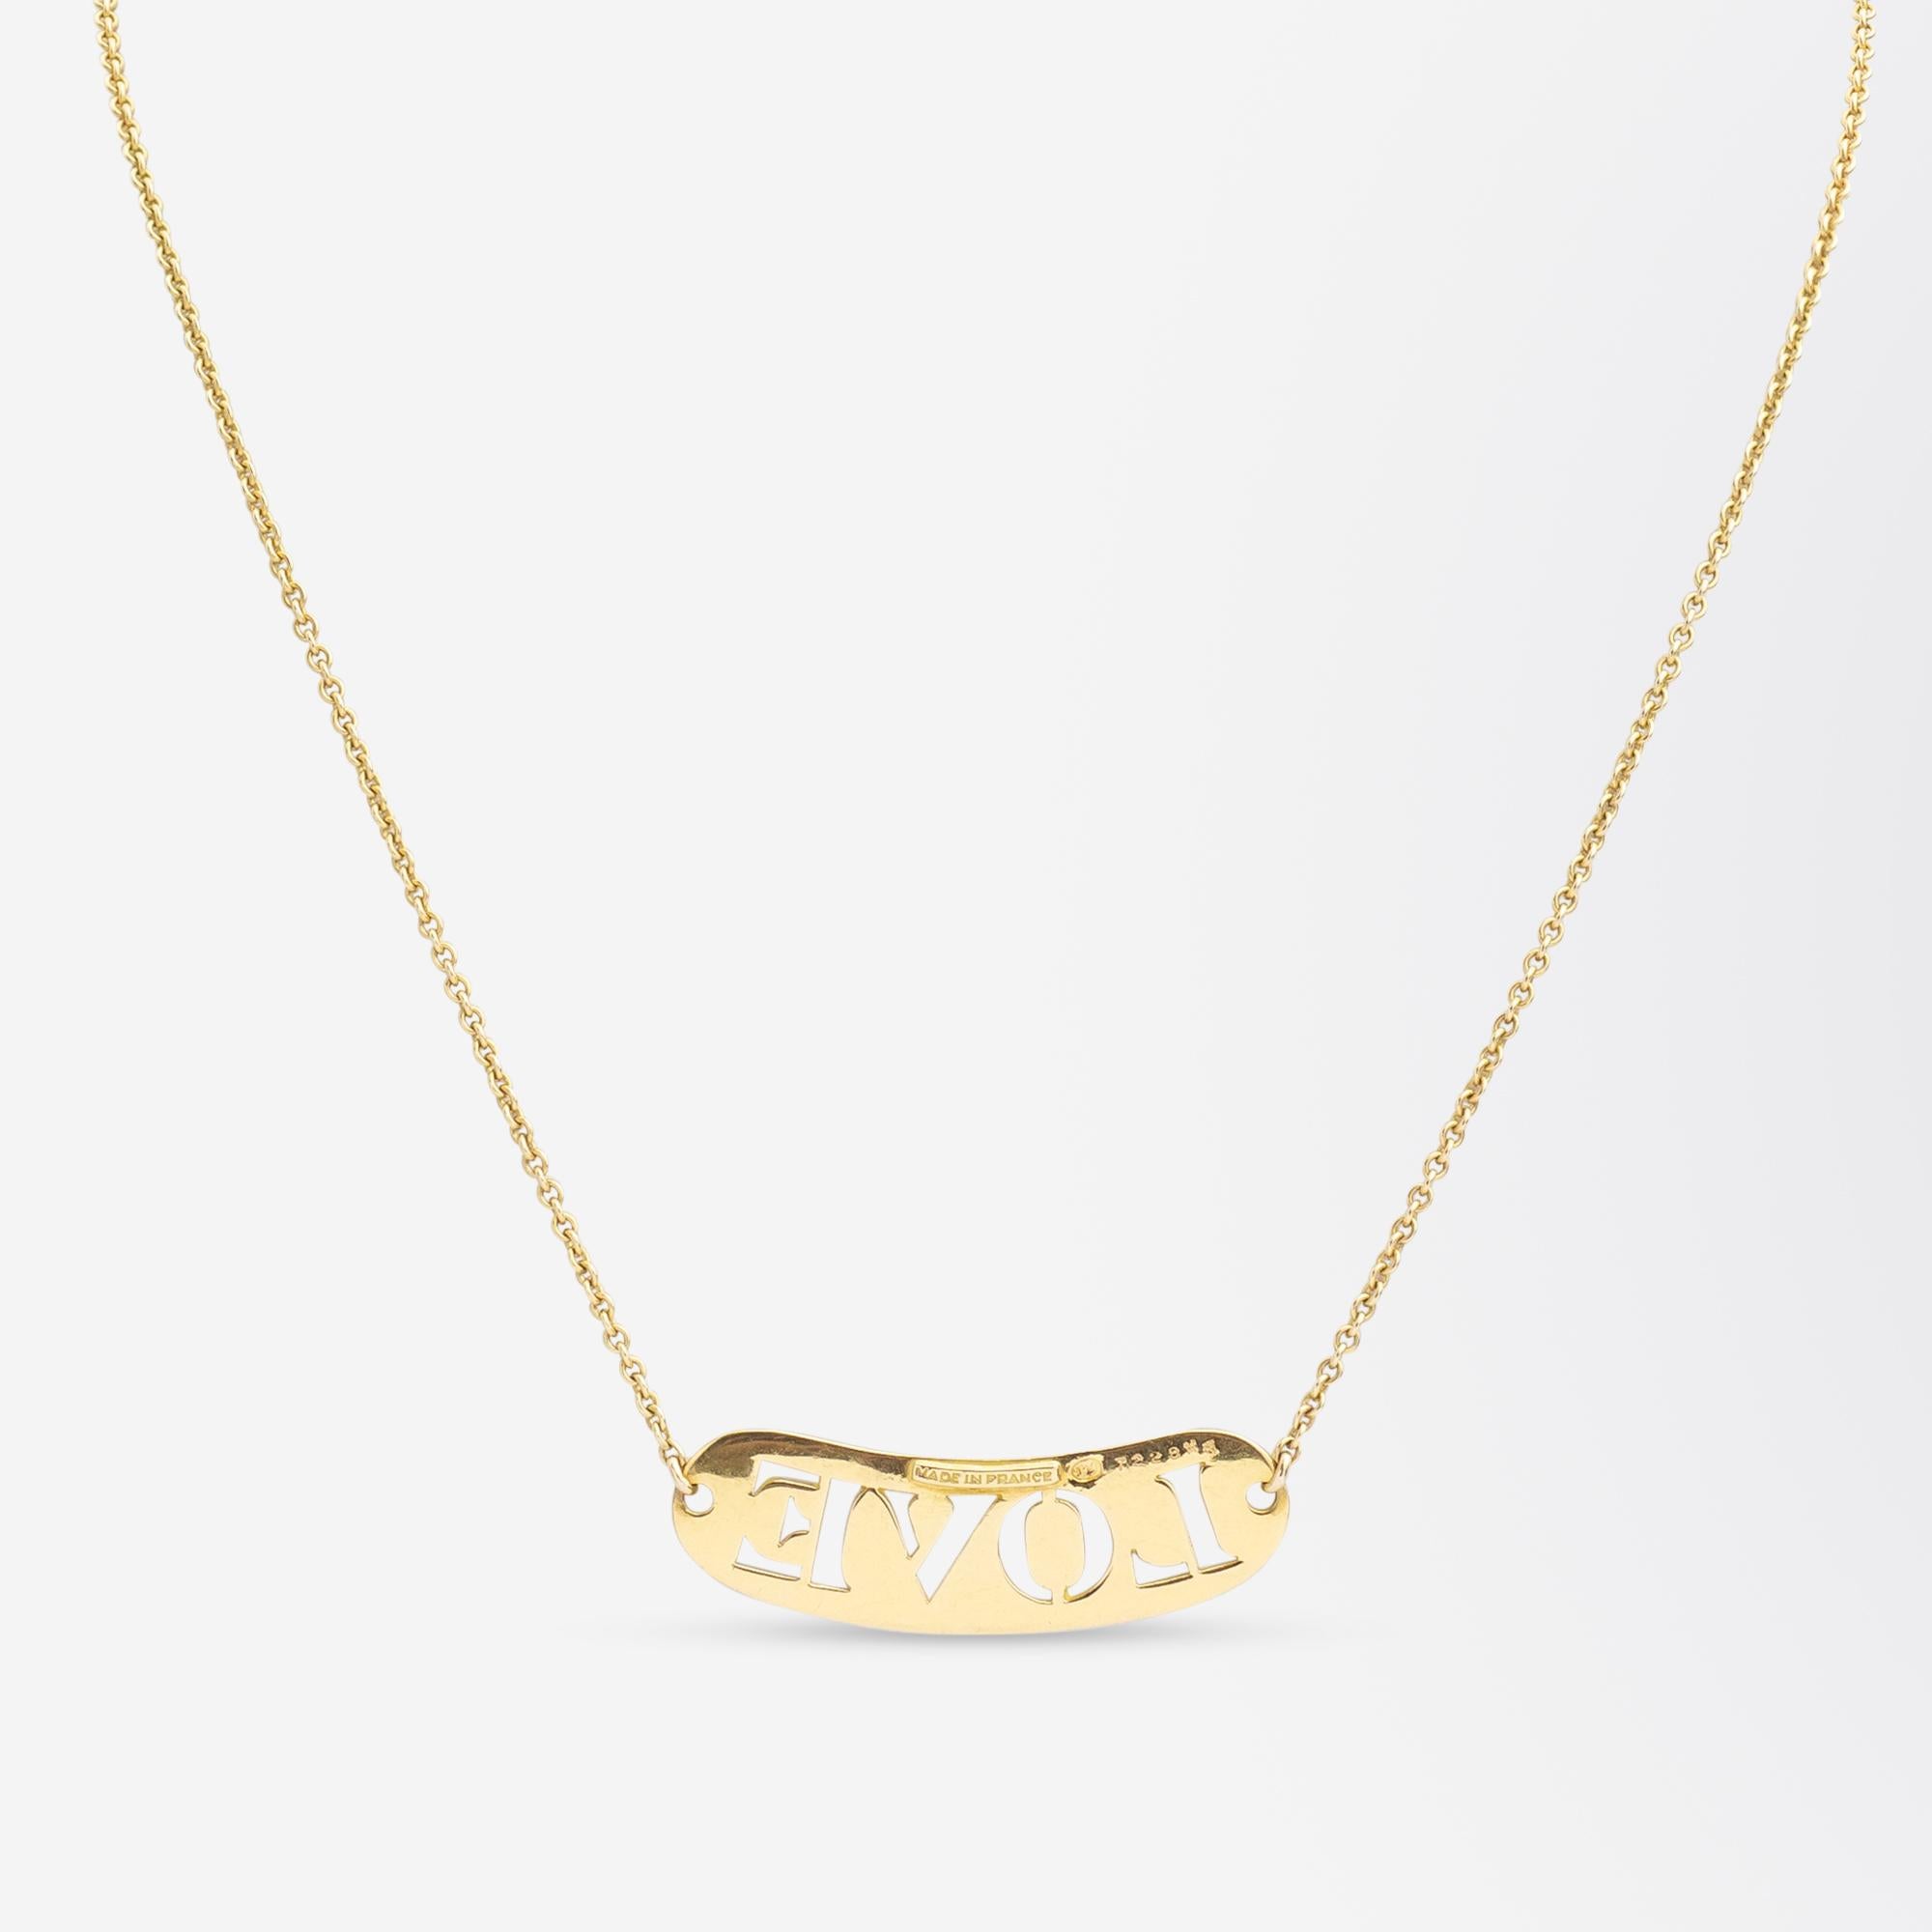 Modern 18 Karat Yellow Gold, French Made 'Love' Necklace For Sale